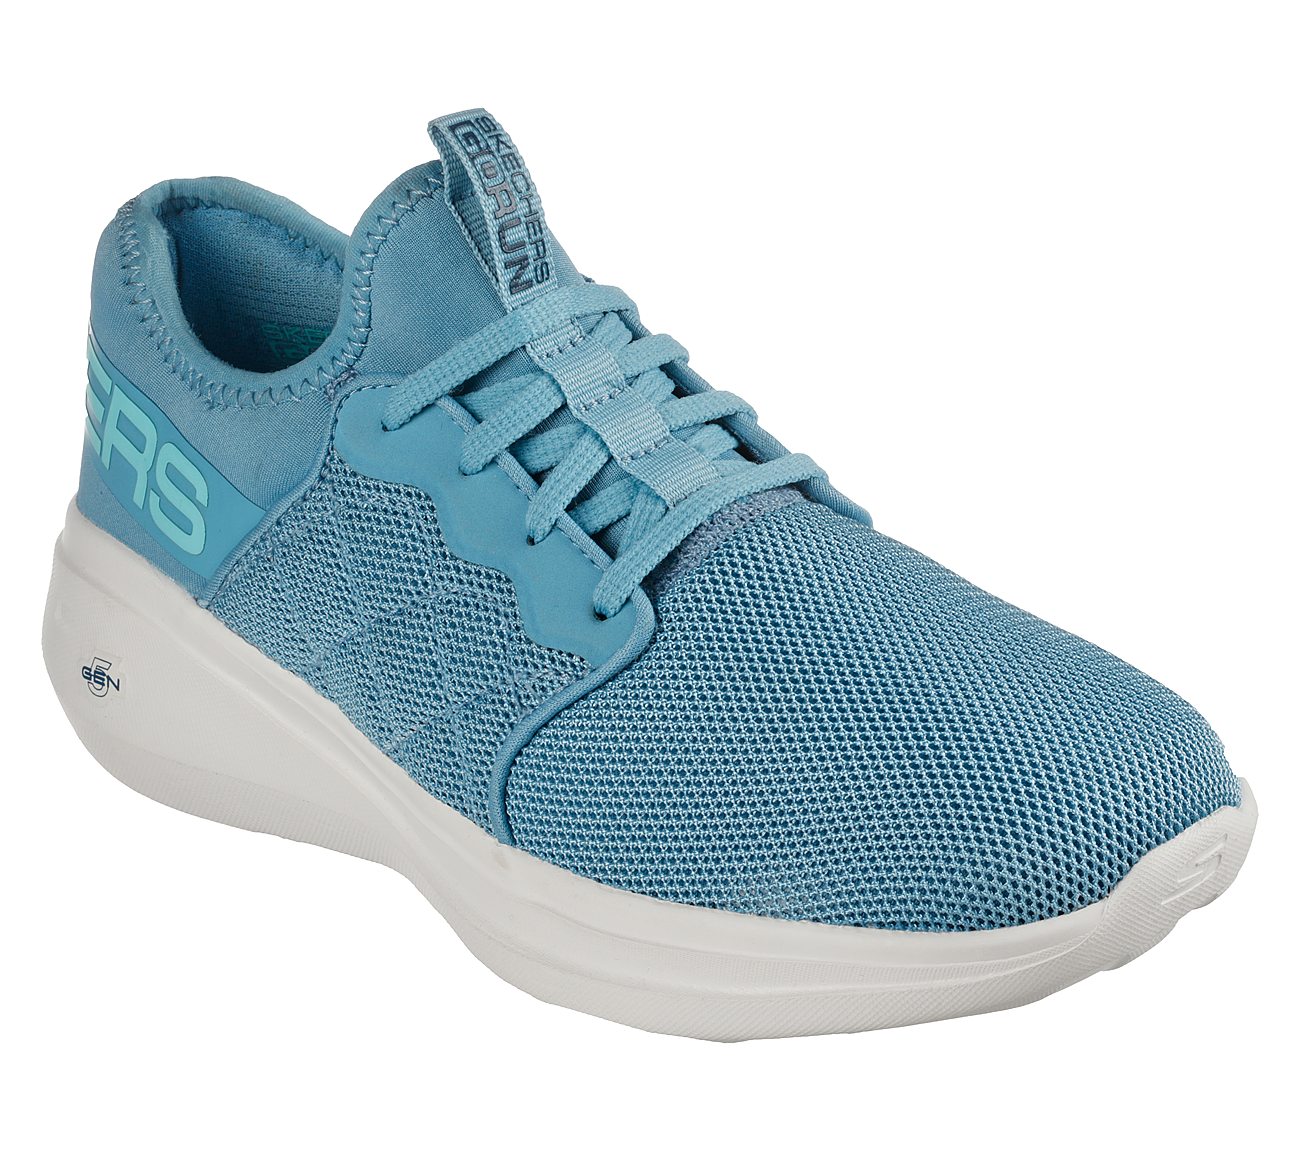 GO RUN FAST - AFTER HOURS, LLIGHT BLUE Footwear Right View